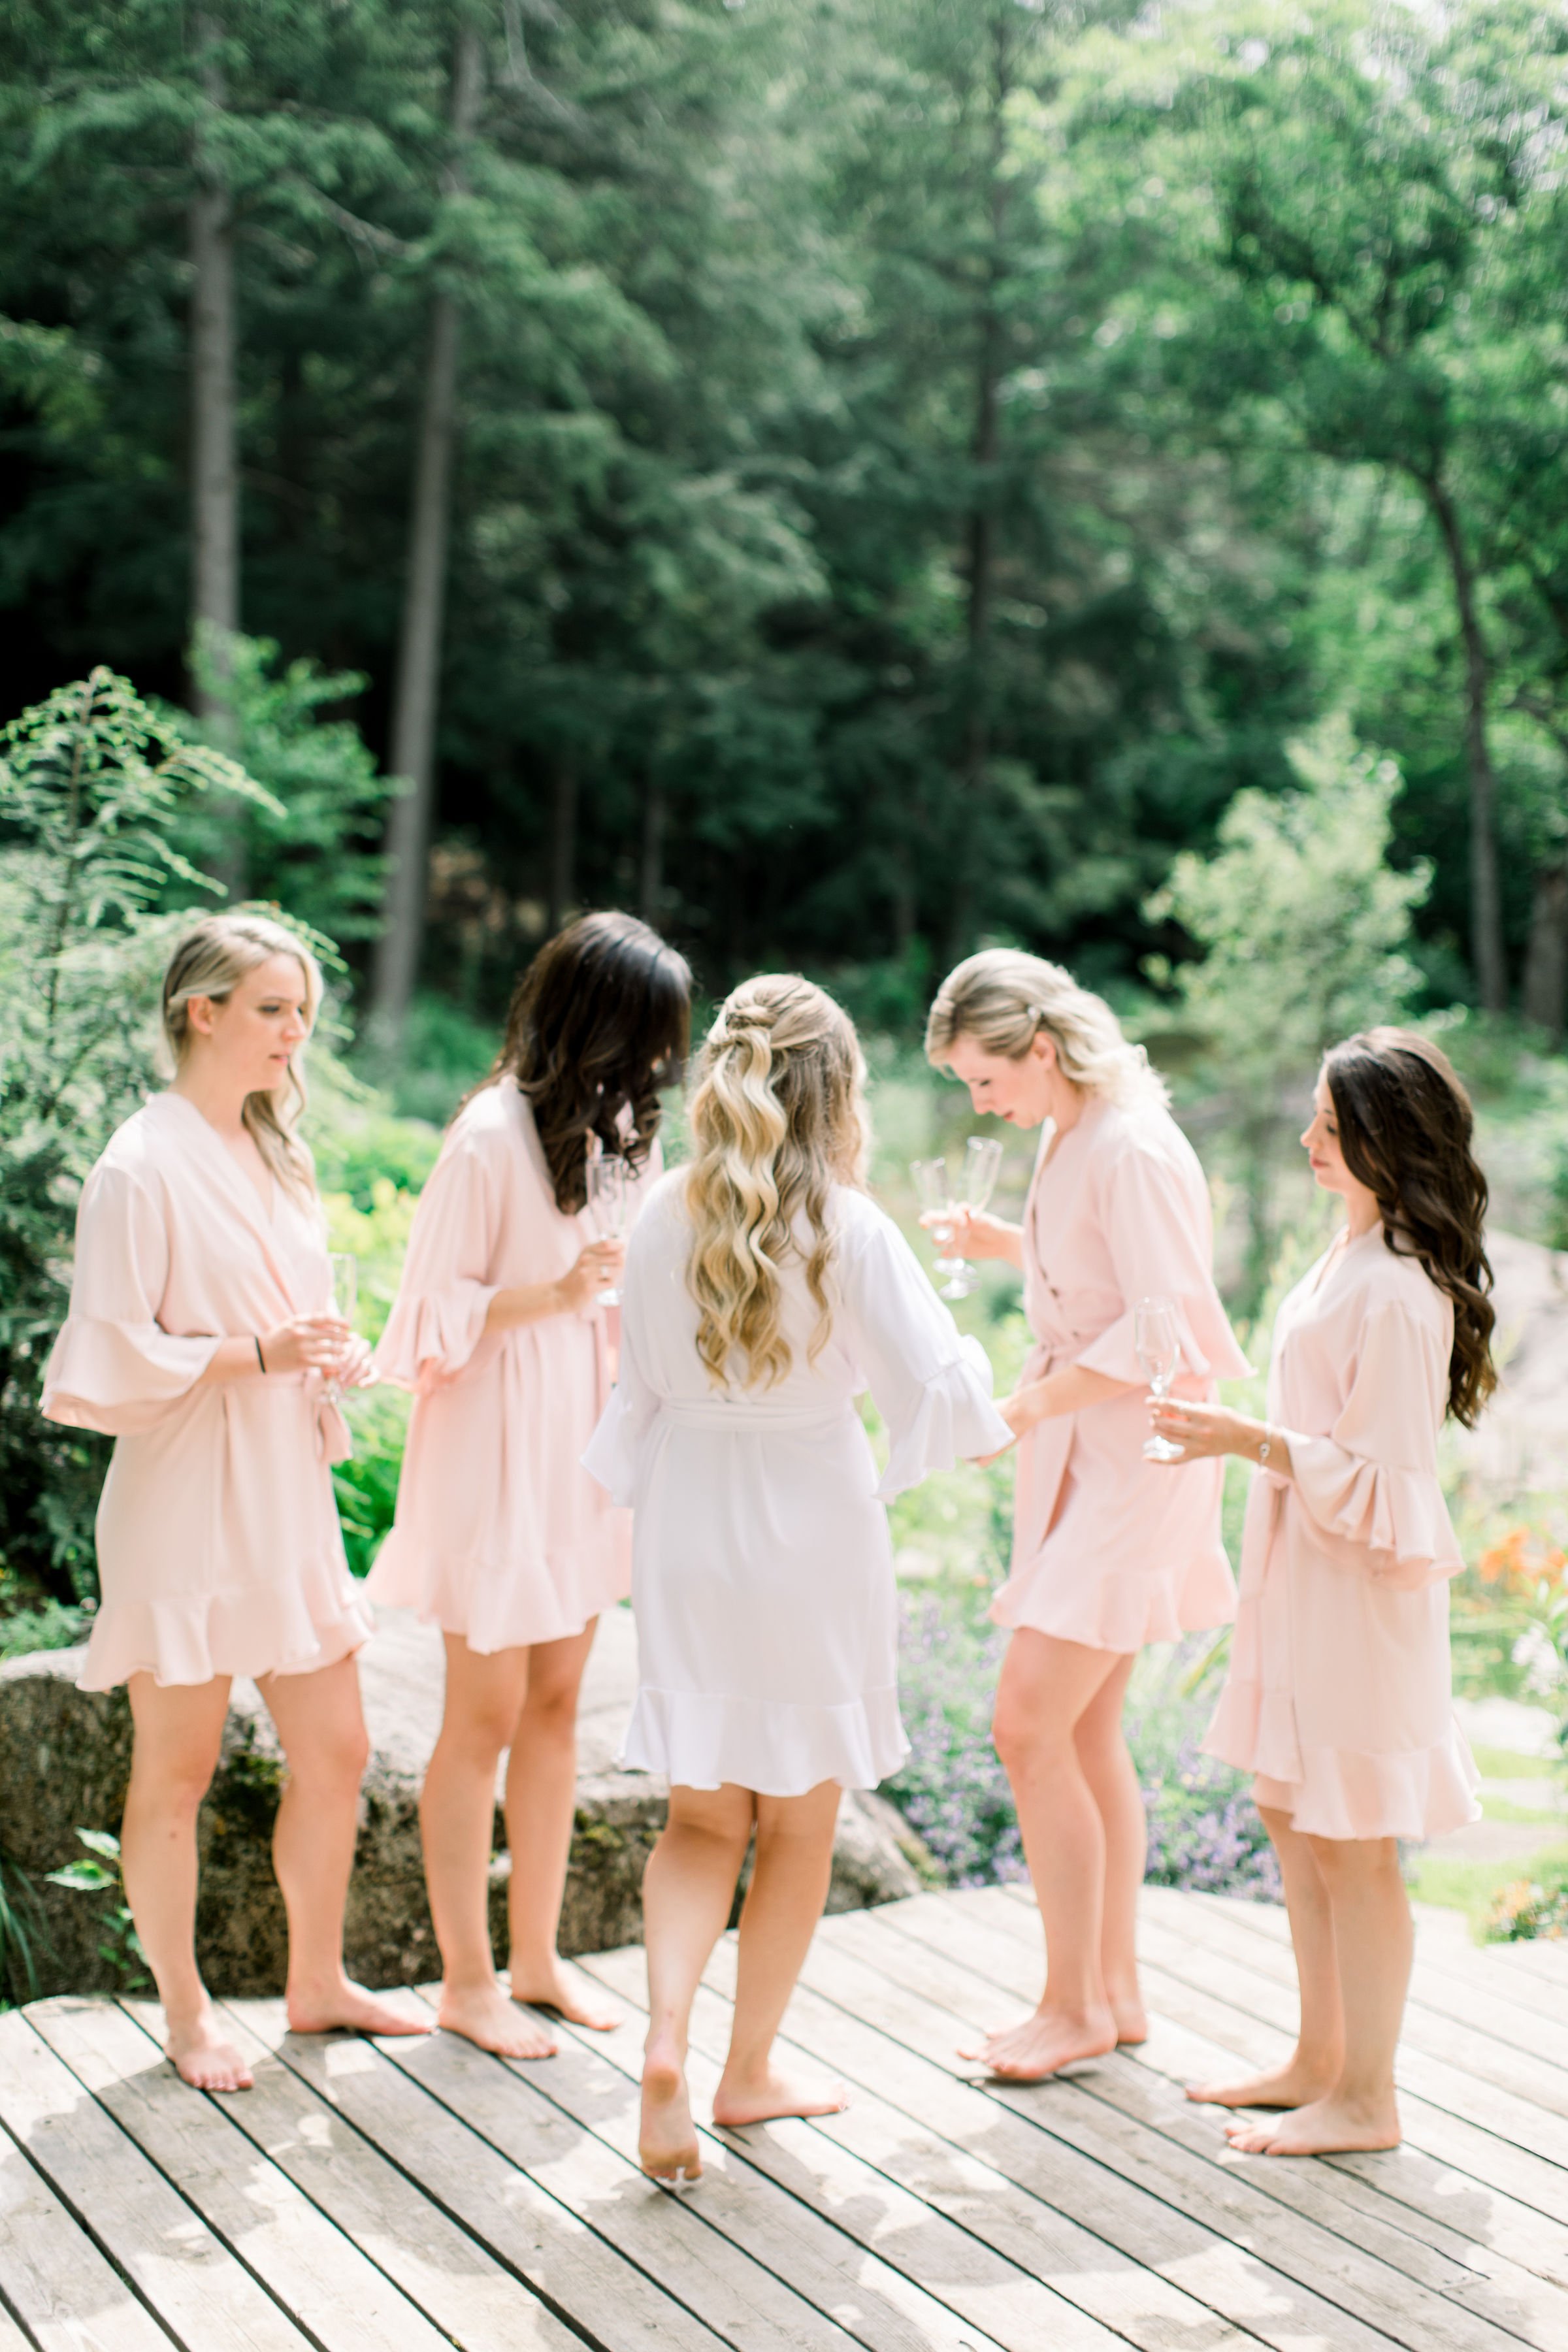  Bridesmaids in silk matching robes celebrate with the bride captured by Chelsea Mason Photography. silk matching bridesmaids robes #Quebecweddings #elegantoutdoorwedding #Quebecweddingphotographers #Chelseamasonphotography #Chelseamasonweddings 